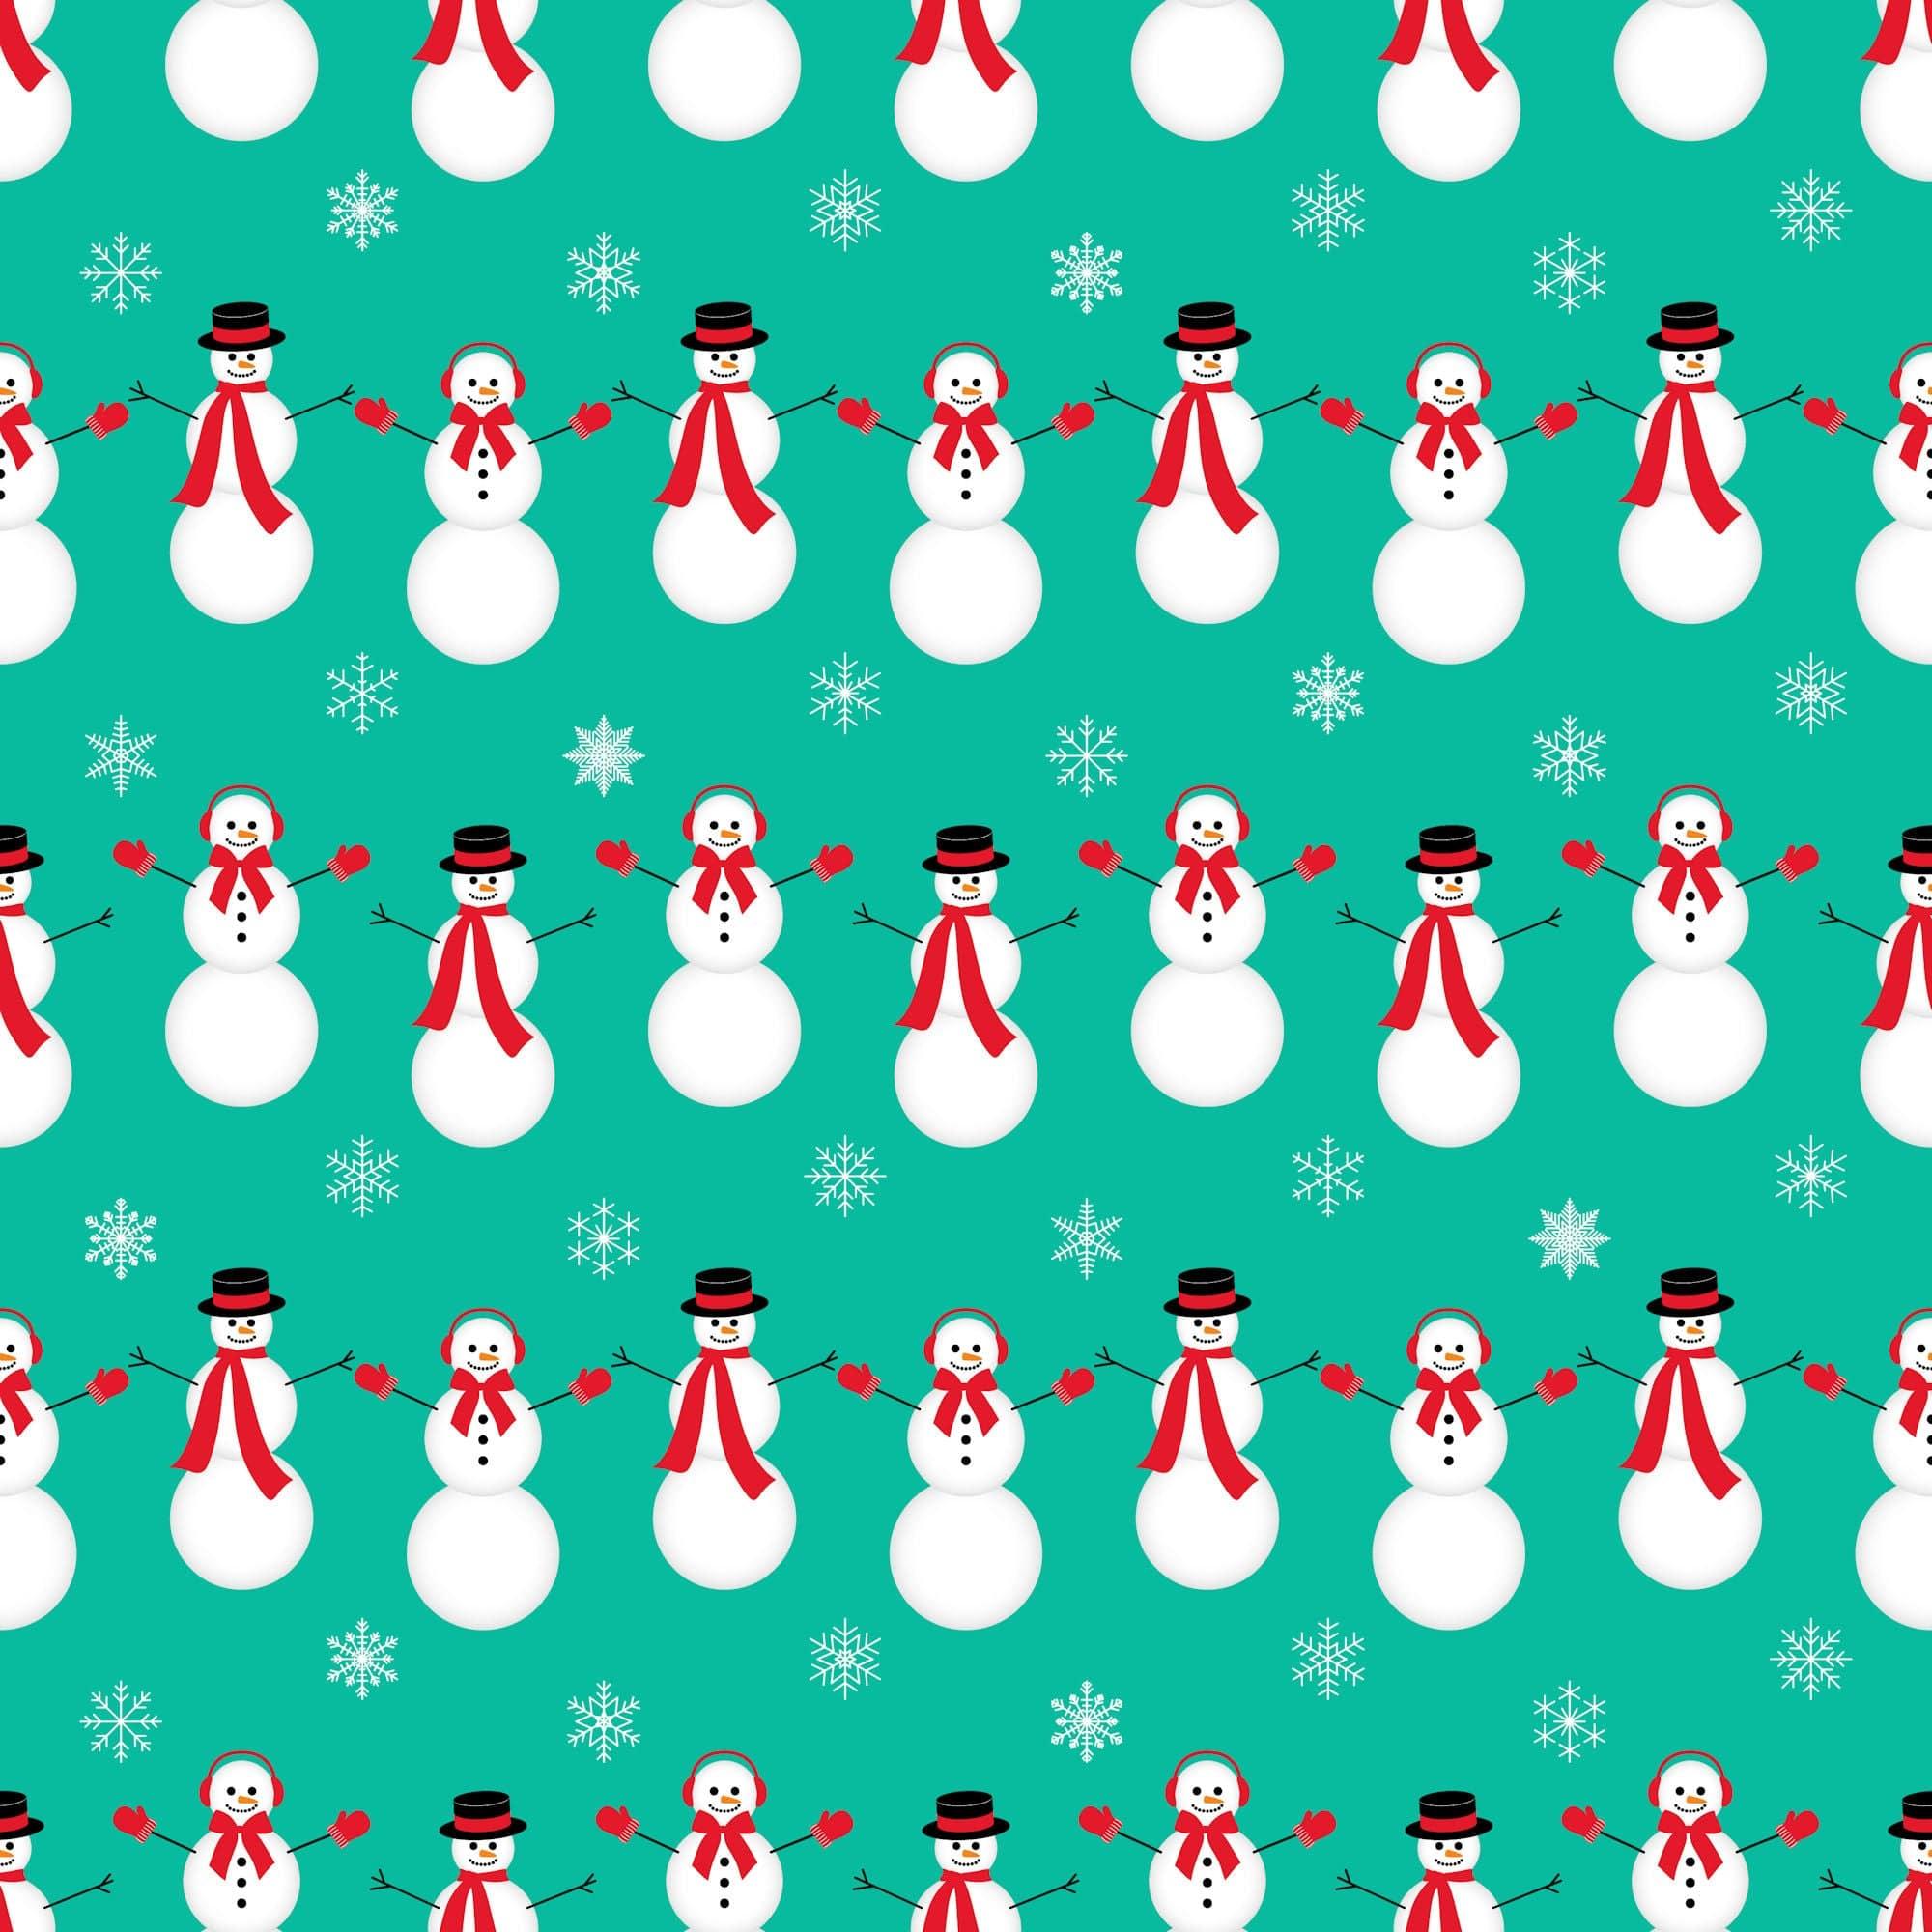 Ugly Christmas Sweater Collection Snowmen 12 x 12 Double-Sided Scrapbook Paper by SSC Designs - Scrapbook Supply Companies